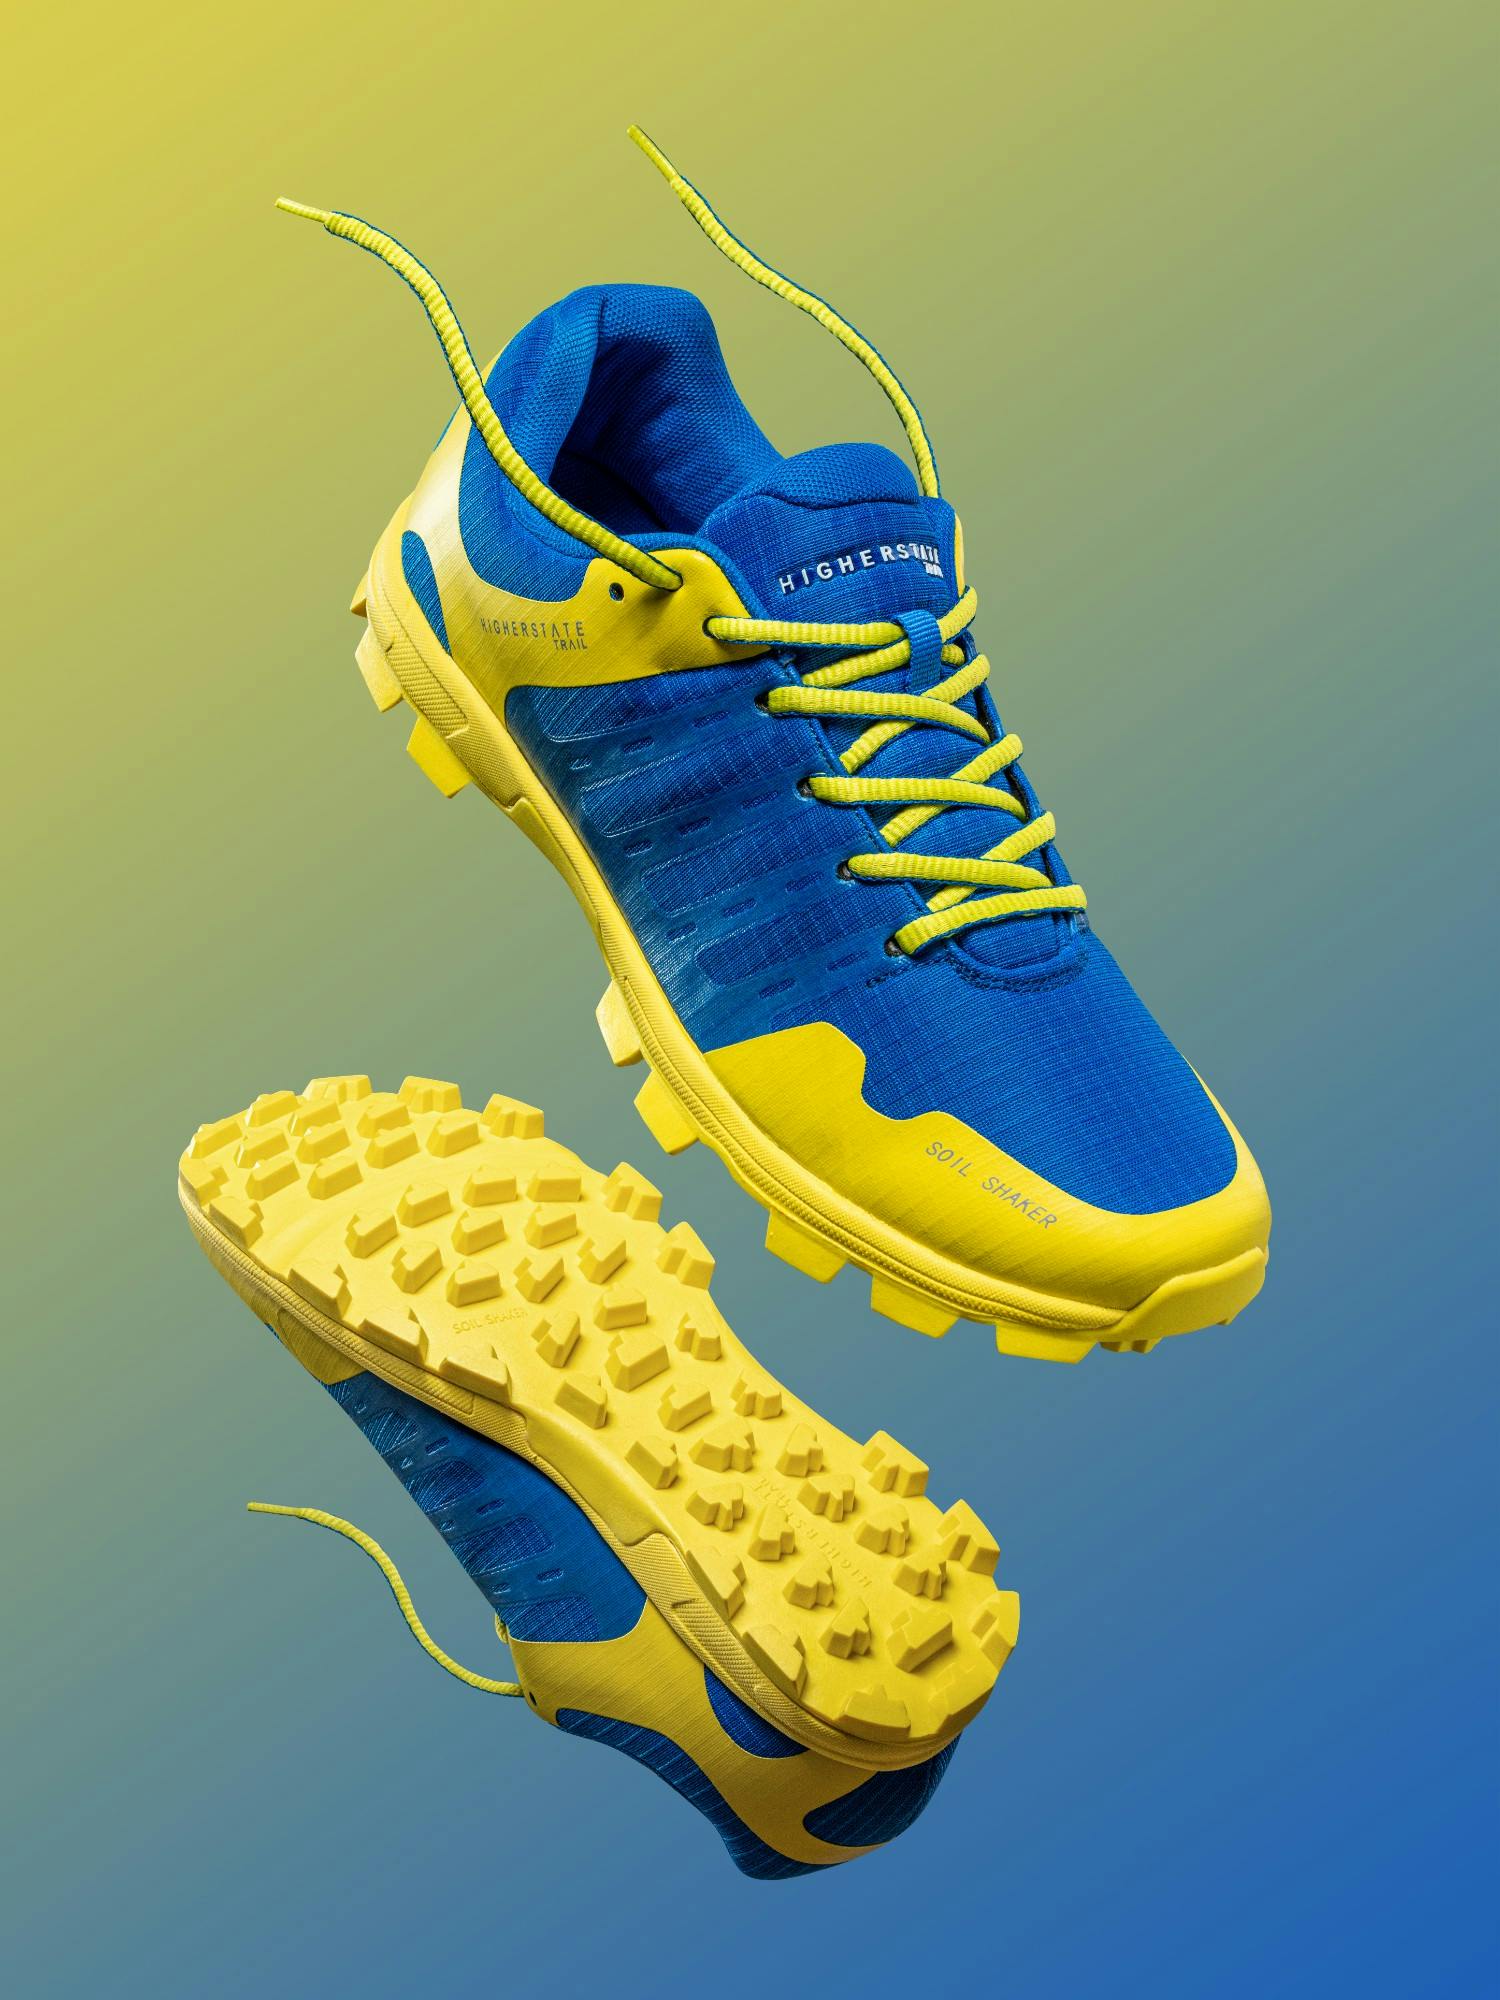 the-higher-state-soil-shaker-2-trail-running-shoes